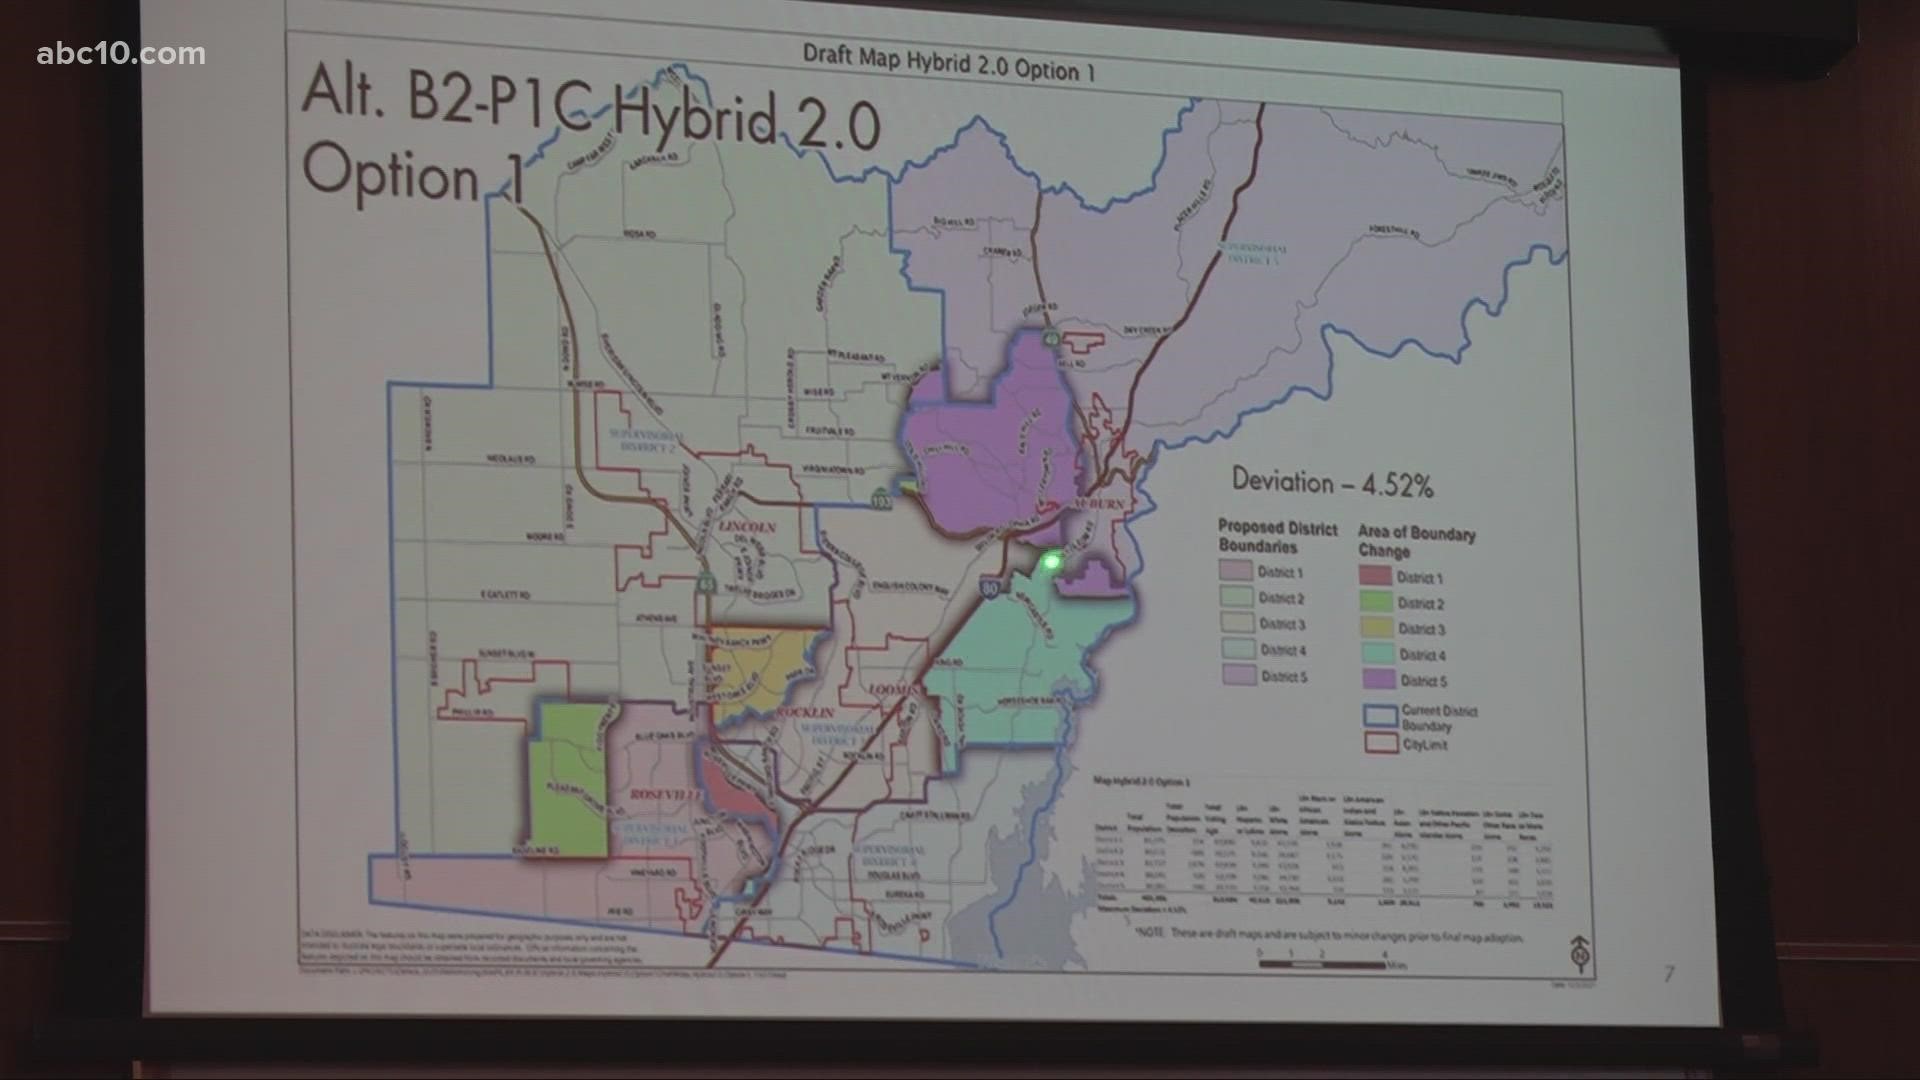 The Placer County Board of Supervisors voted Tuesday to approve Hybrid Map 2.0 Option 1 in a unanimous second vote following an initial 2-3 vote against it.